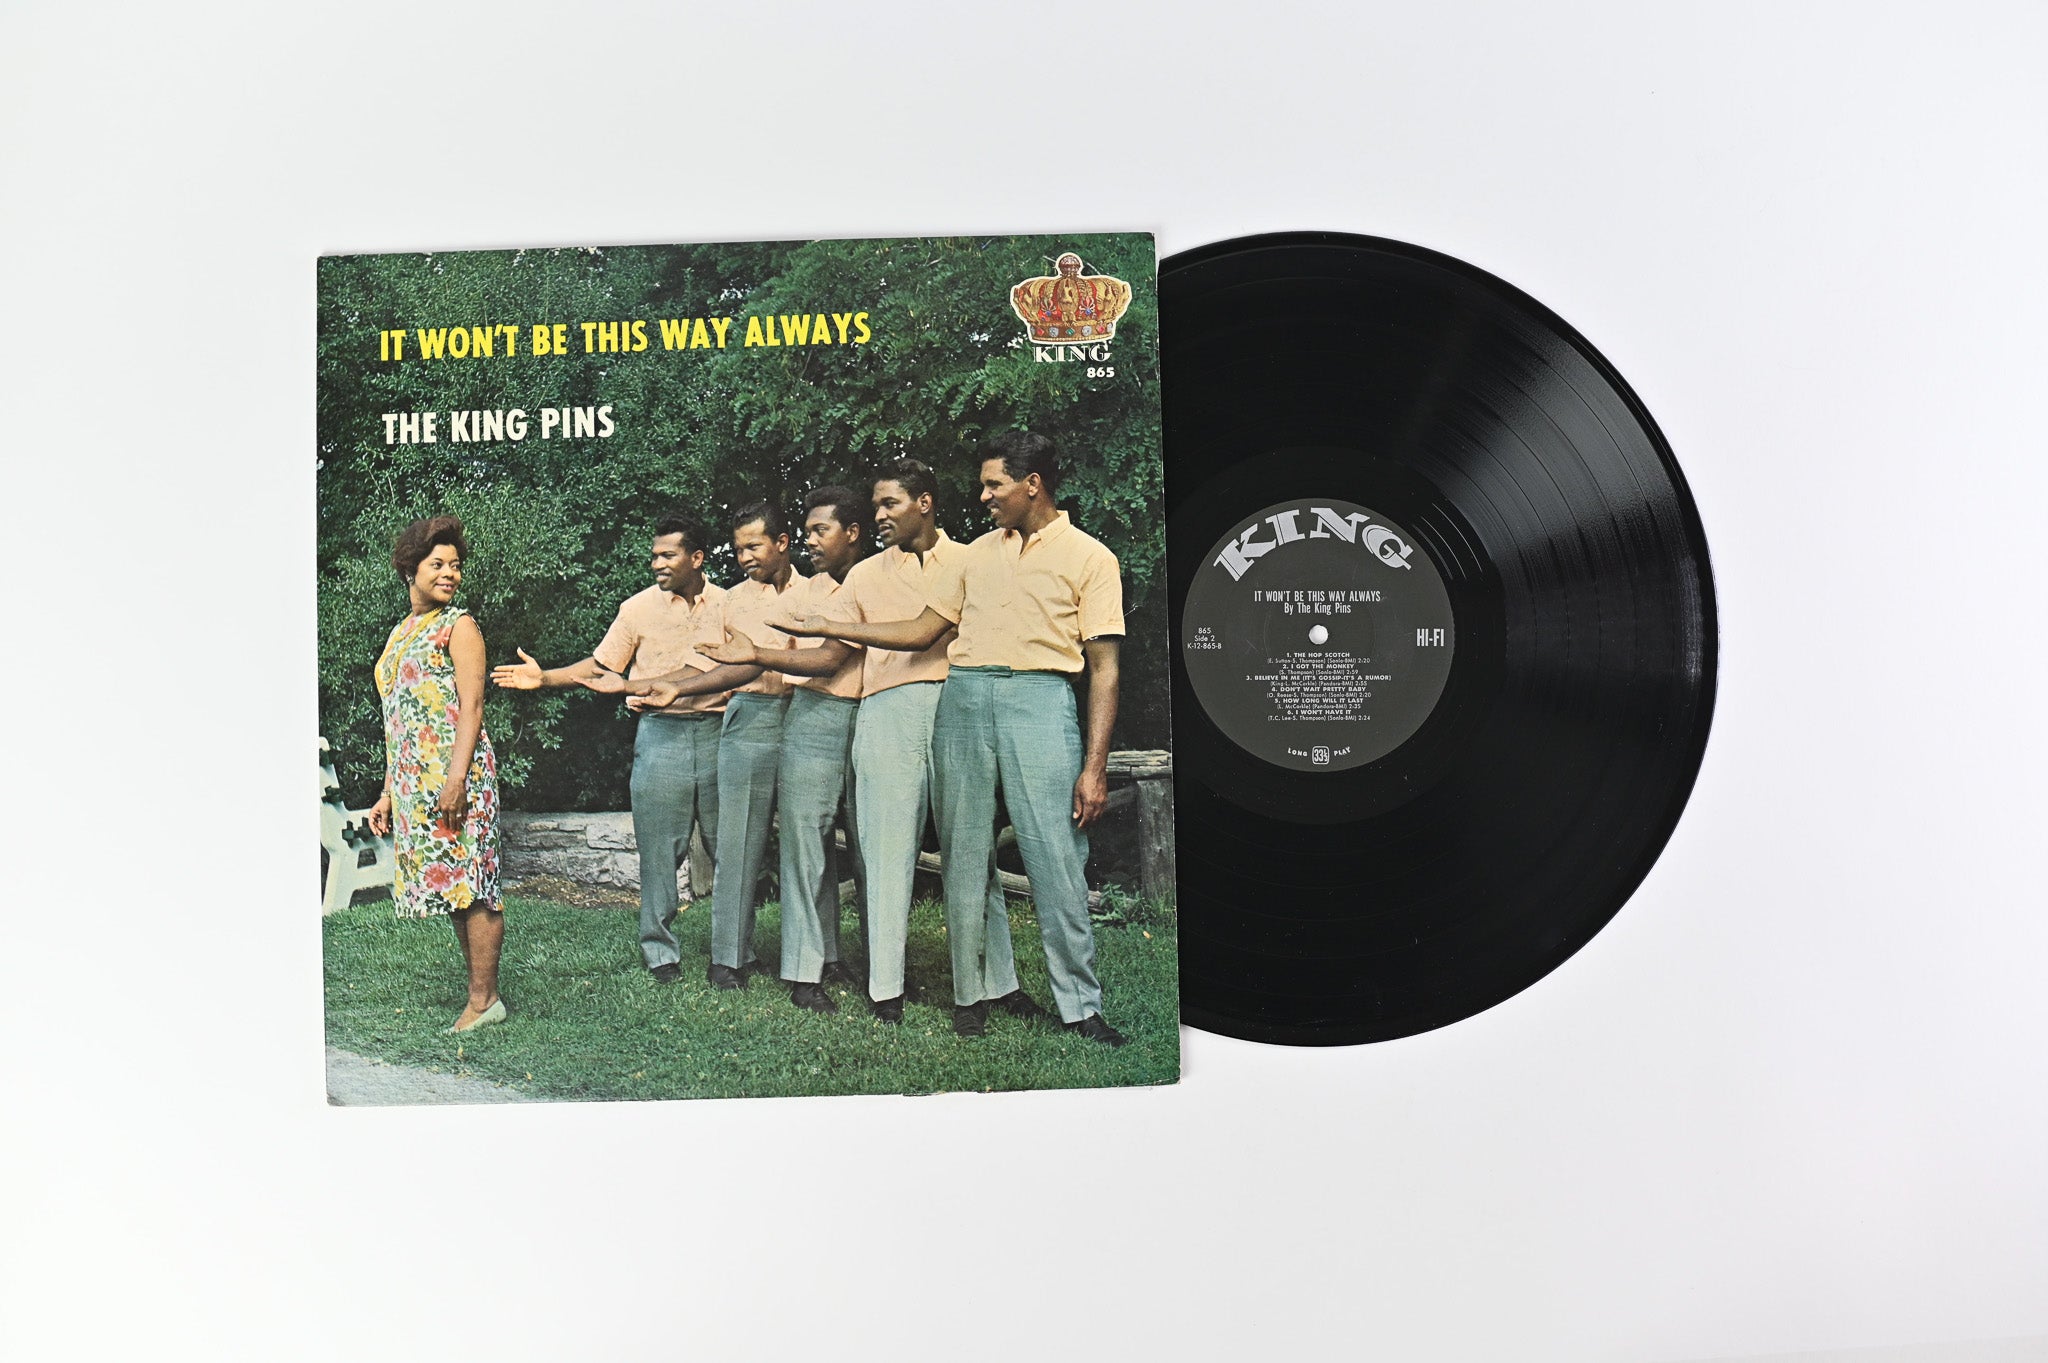 The King Pins - It Won't Be This Way Always on King Records Mono